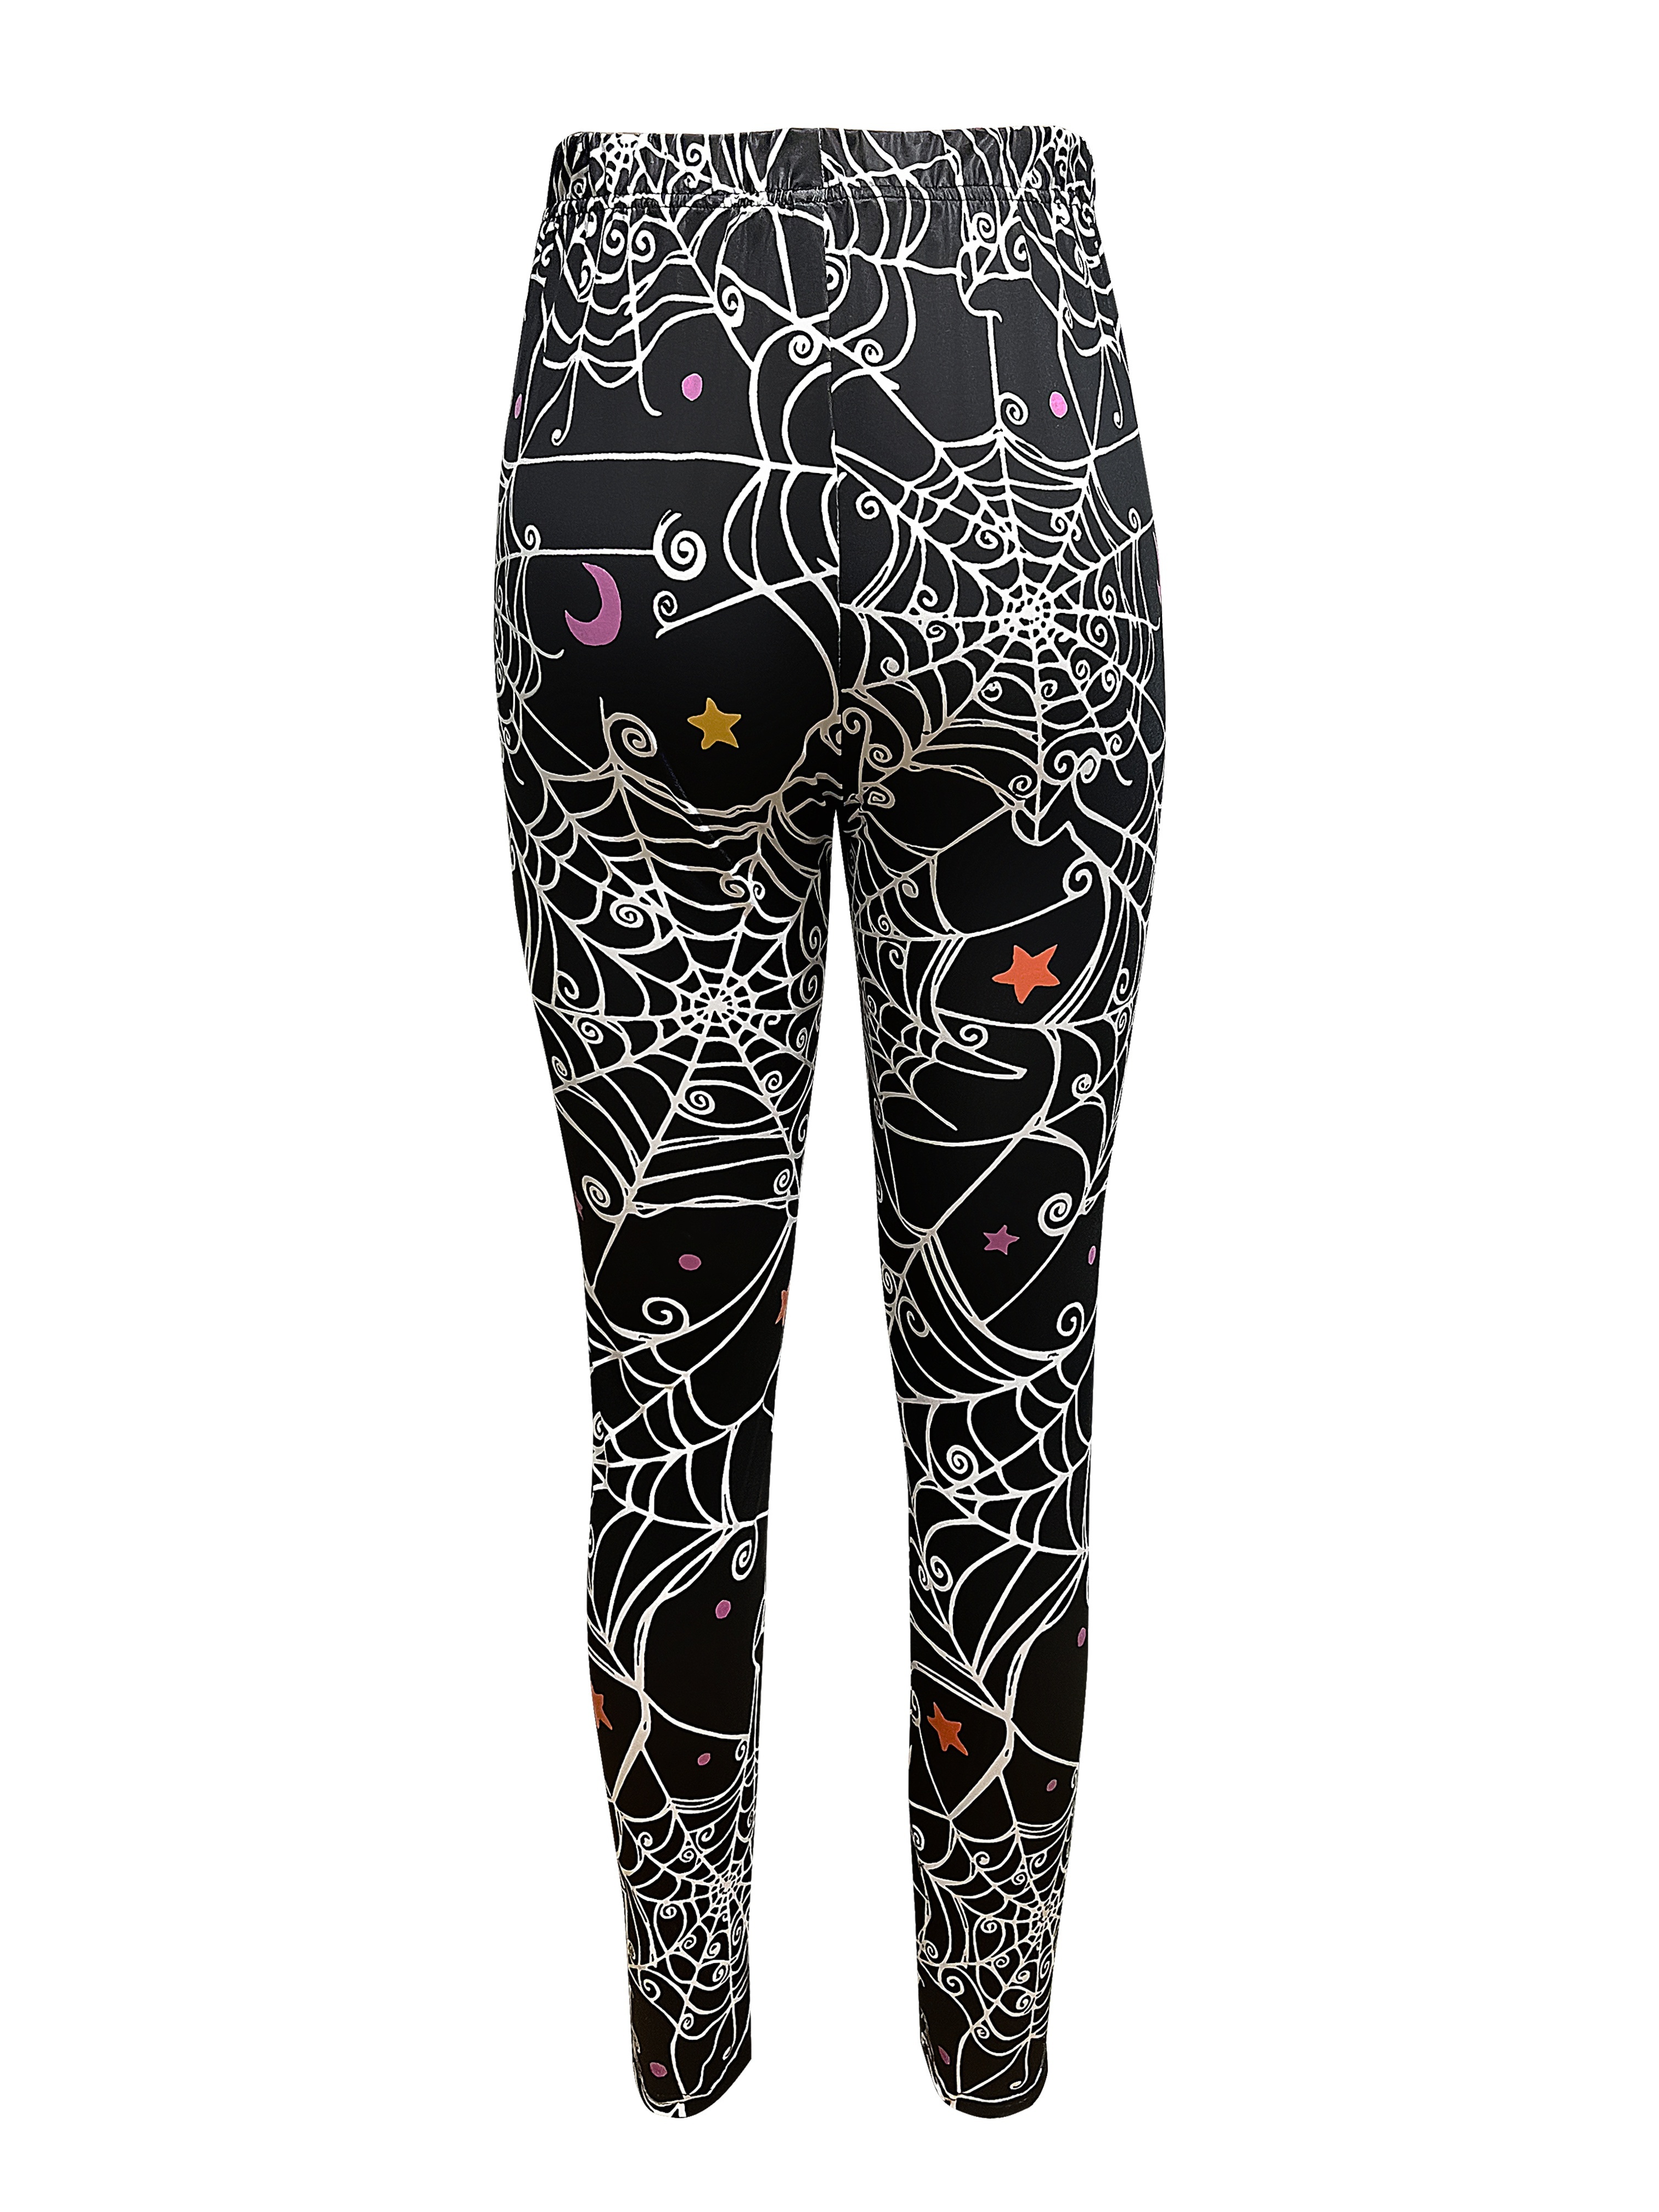 Spider Web Leggings, Goth Workout Clothes